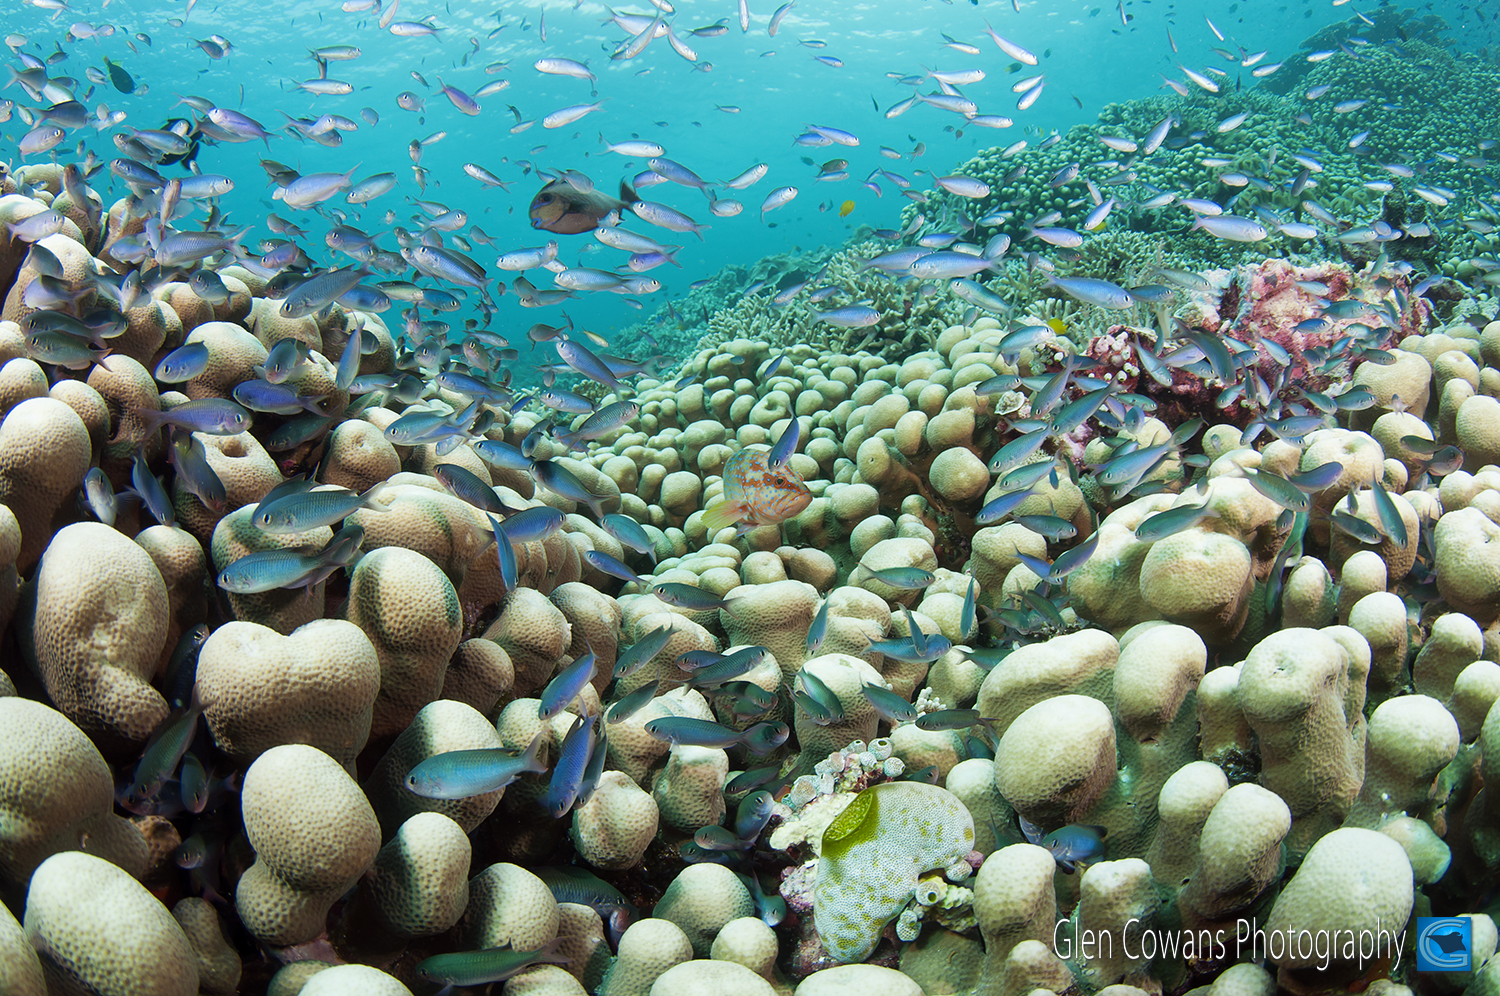 Potato coral and chromis make for wonderful photographic compositions